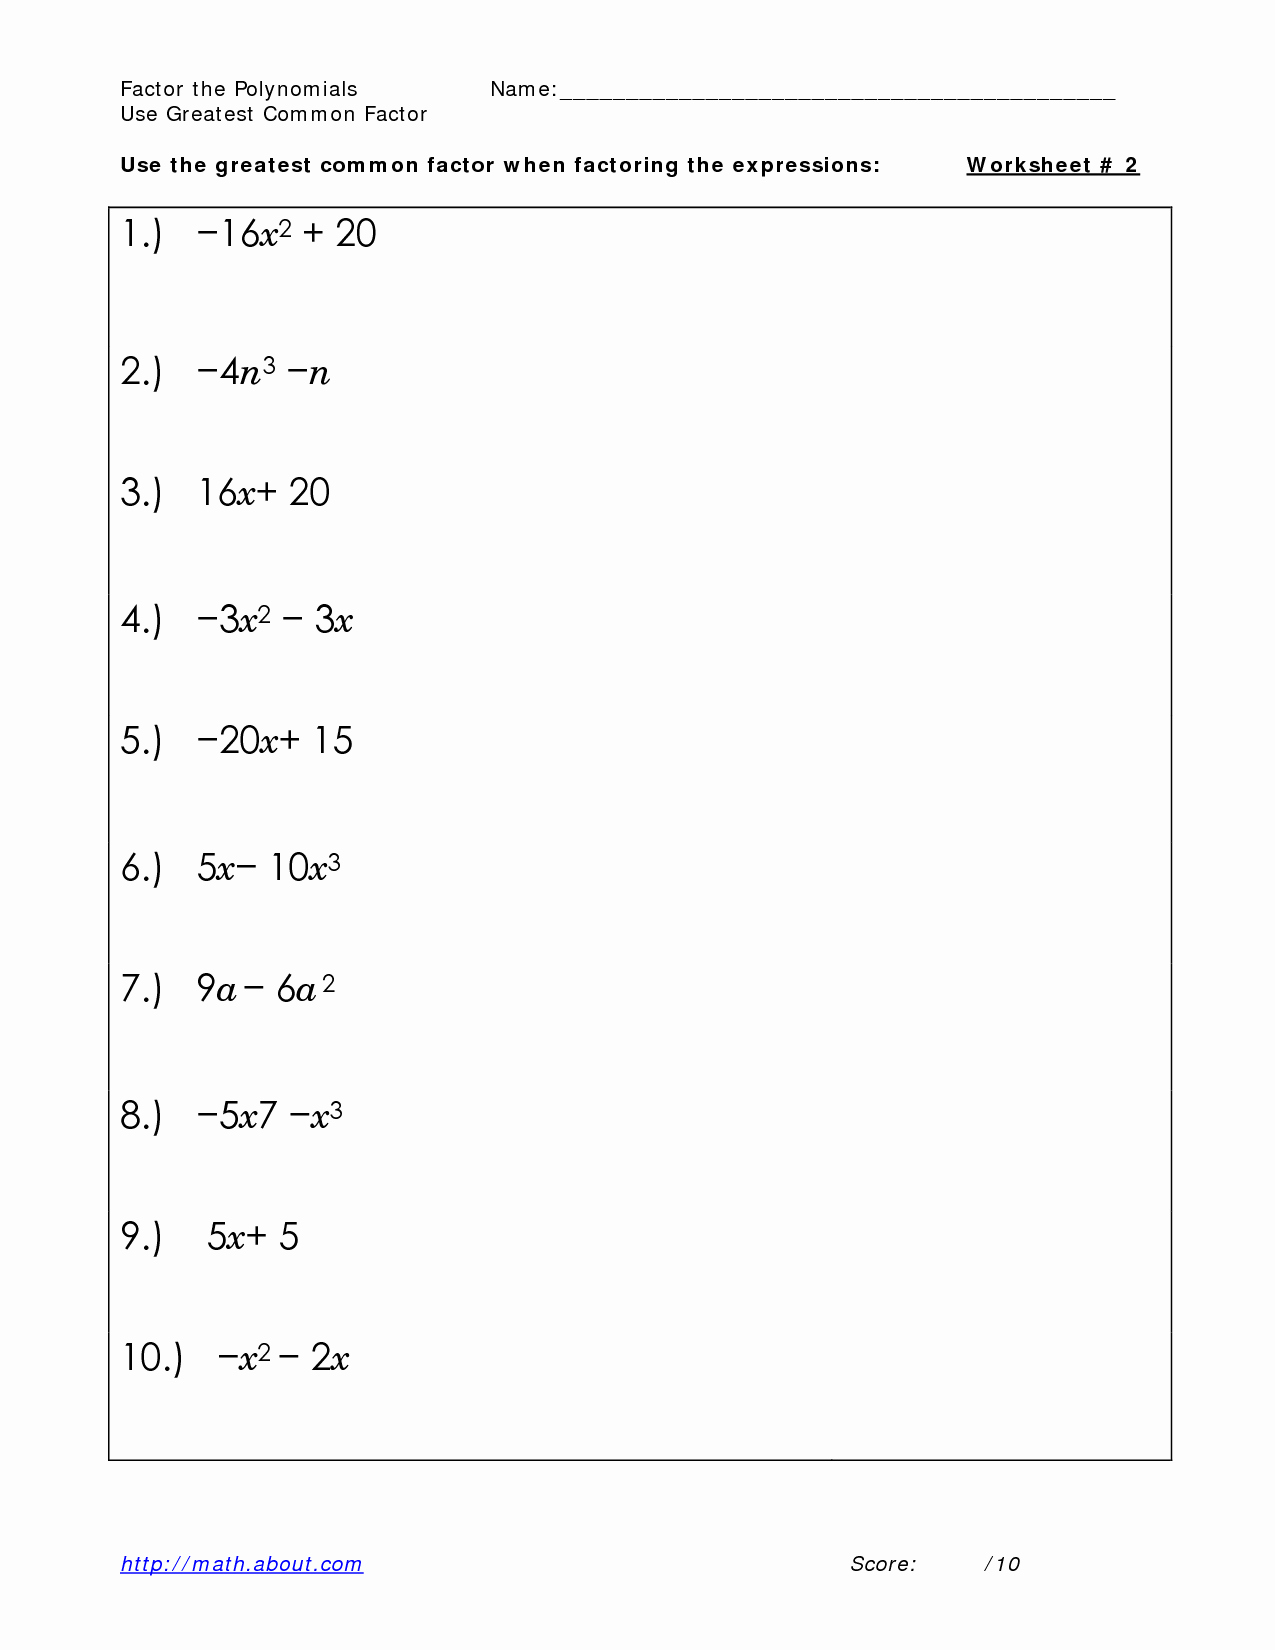 Factoring Worksheet with Answers Inspirational 10 Best Of Factoring Polynomials Practice Worksheet